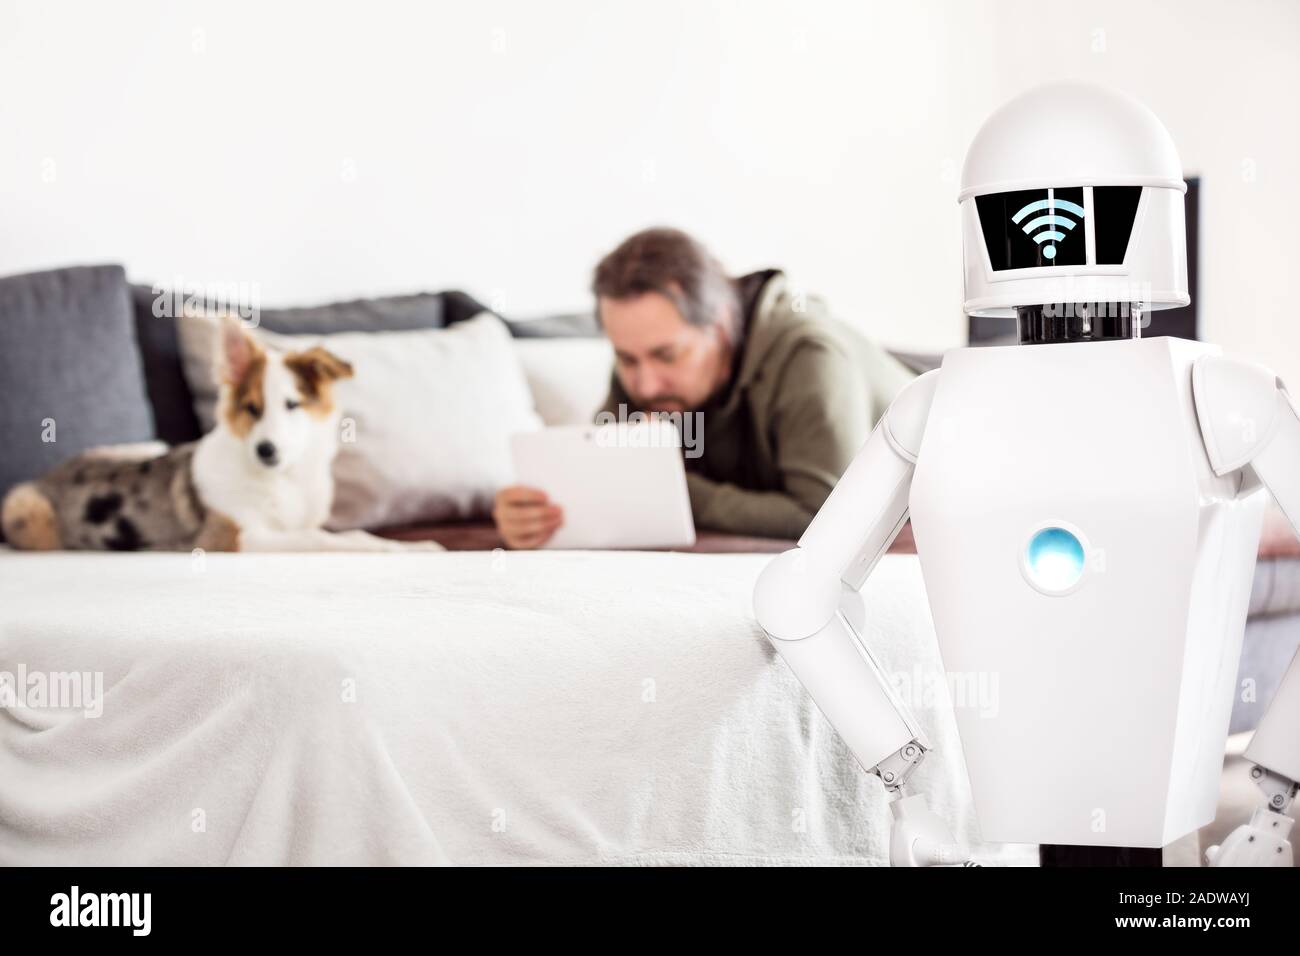 man is laying on a couch with his puppy dog and uses his tablet while his service household robot is standing in the front, a lan or wifi symbol on hi Stock Photo